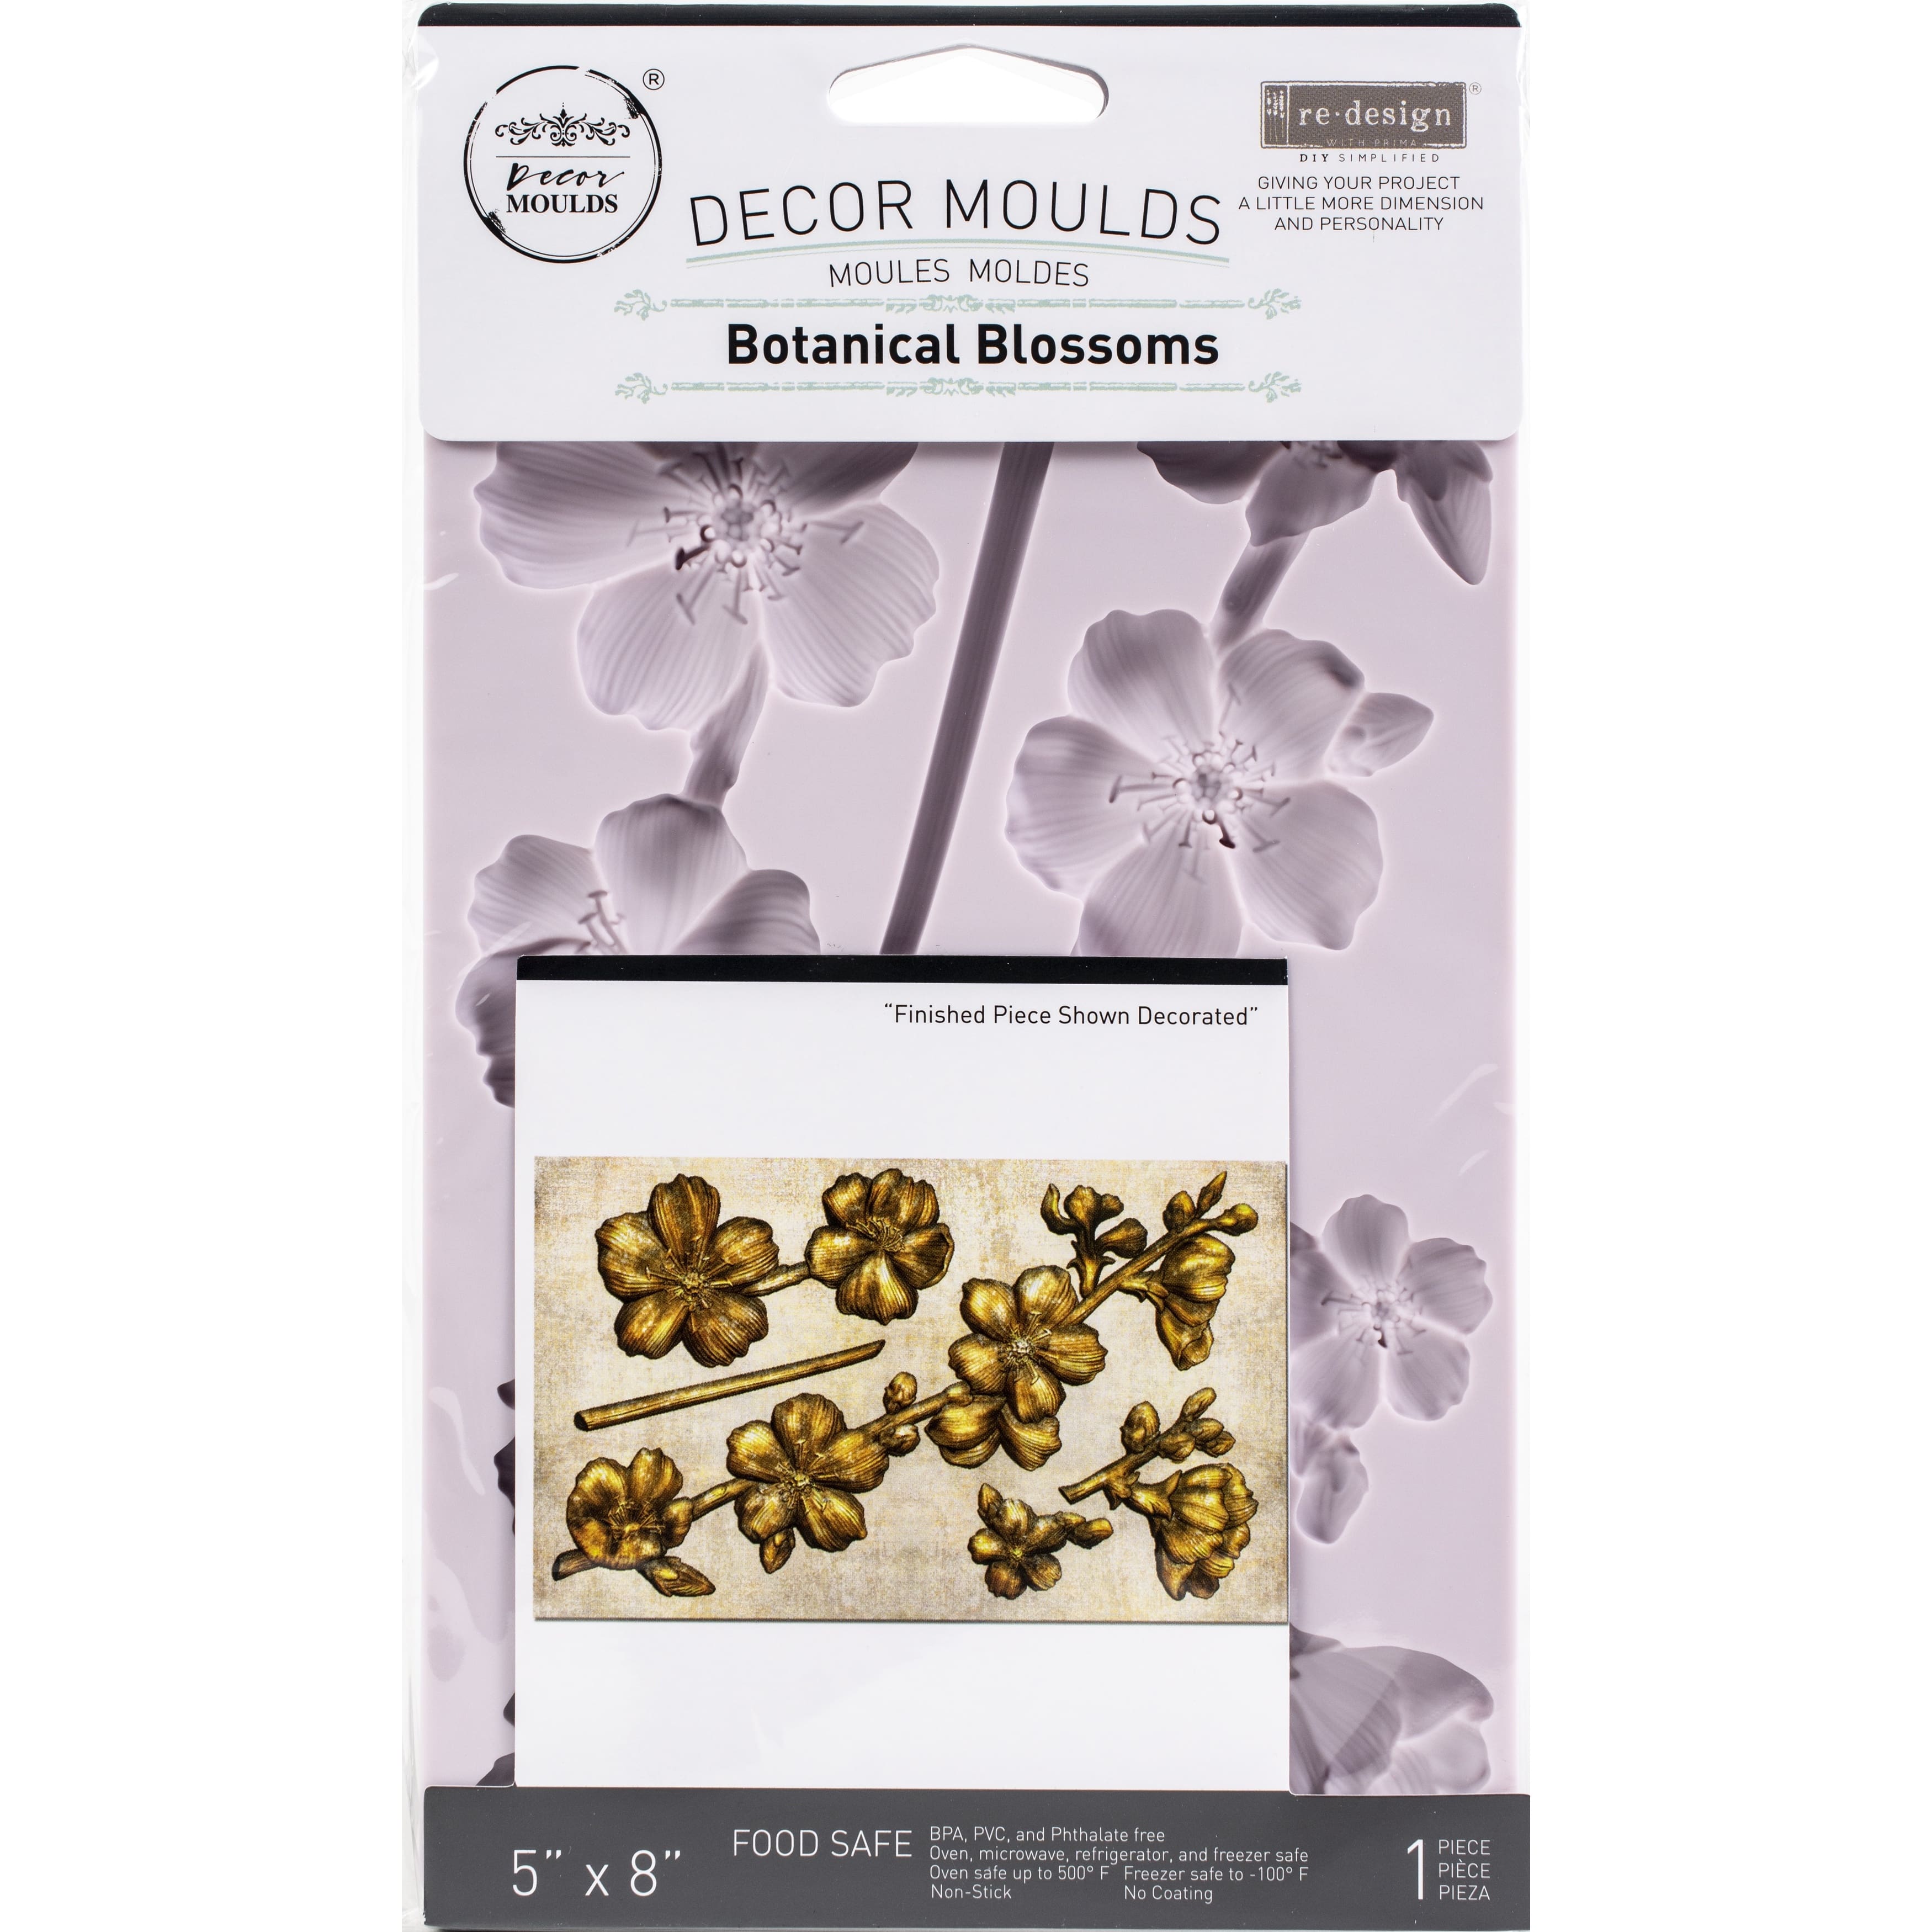 Redesign with Prima&#xAE; Decor Moulds&#xAE; Botanical Blossoms Silicone Mold